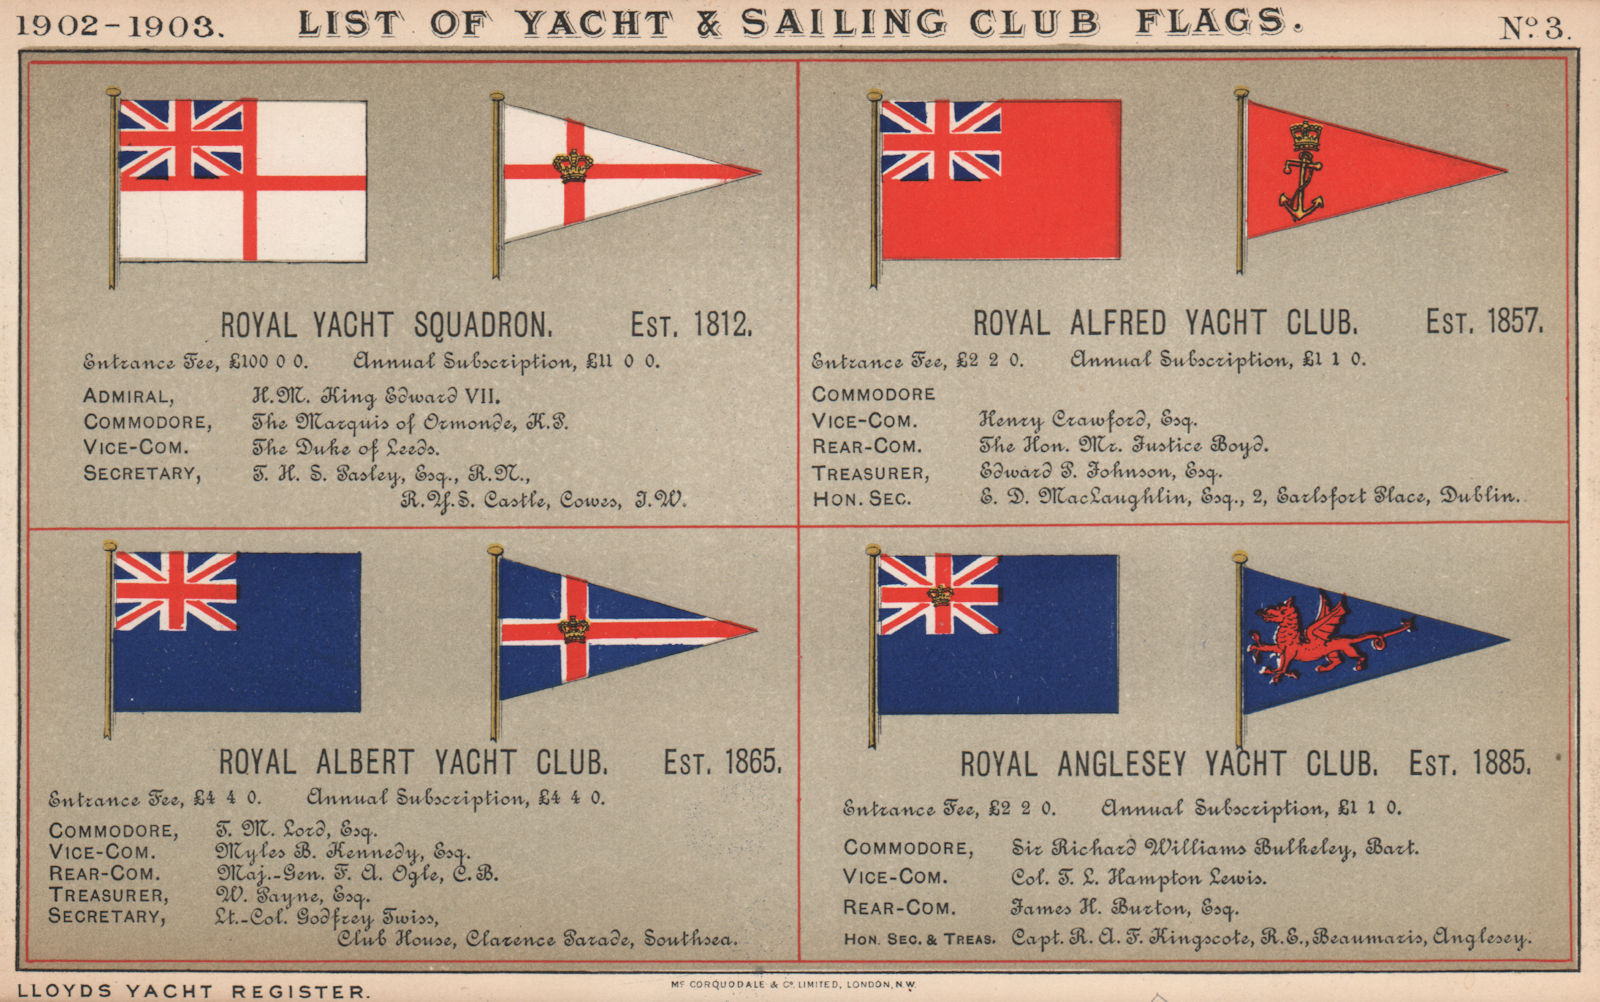 ROYAL YACHT & SAILING CLUB FLAGS. Yacht Squadron. Alfred. Albert. Anglesey 1902